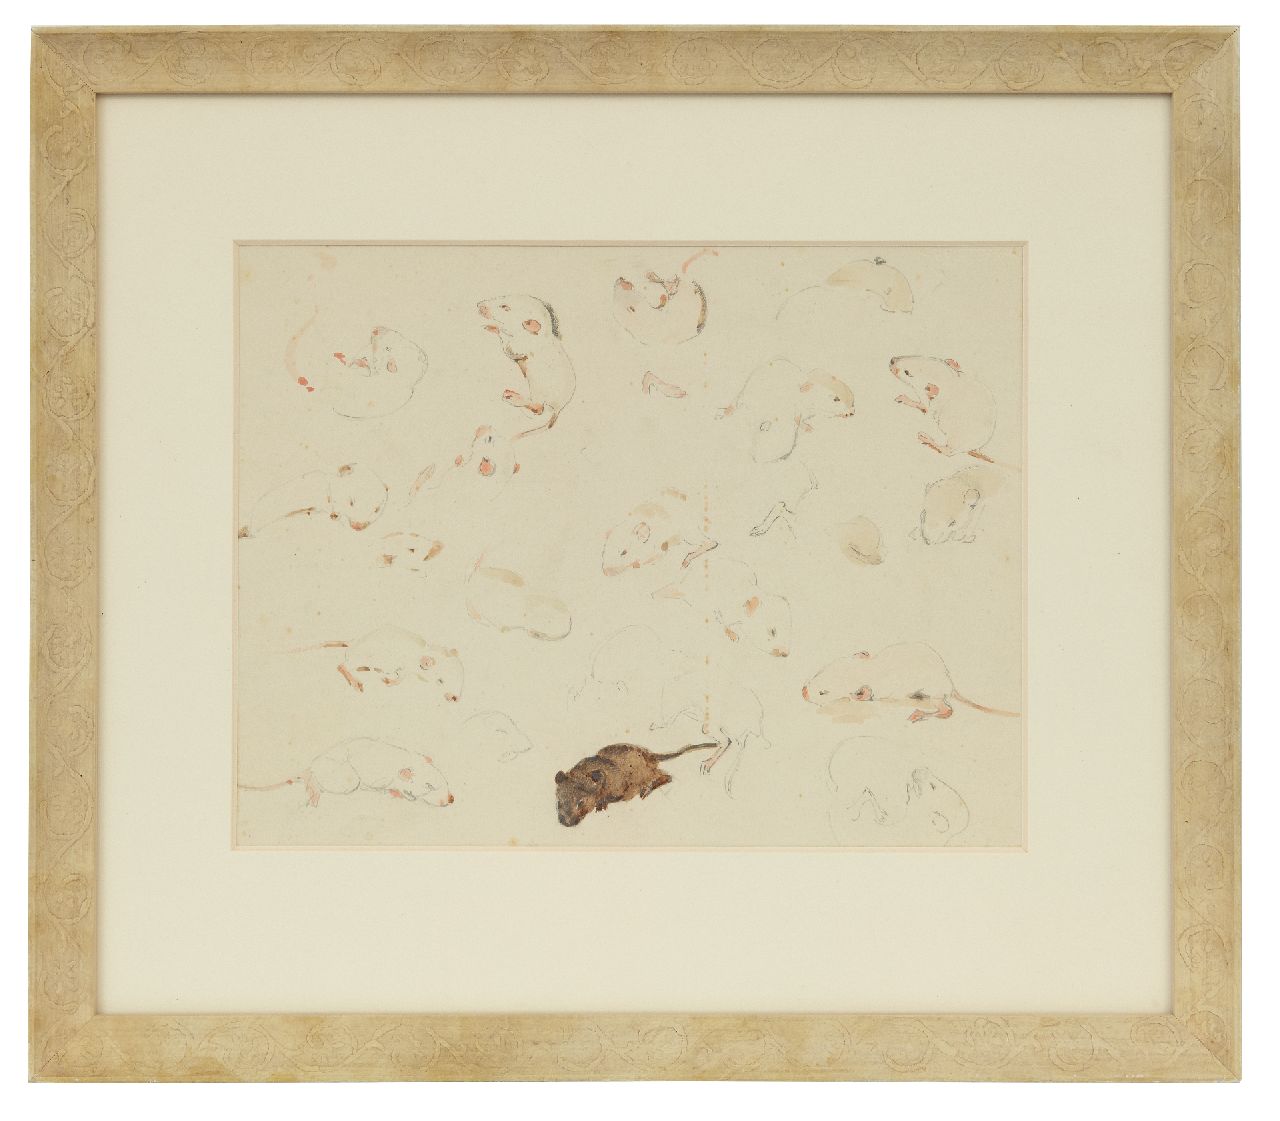 Bruigom M.C.  | Margaretha Cornelia 'Greta' Bruigom | Watercolours and drawings offered for sale | A study of baby mice, 10 days old, pencil and watercolour on paper 19.9 x 24.1 cm, signed l.r.